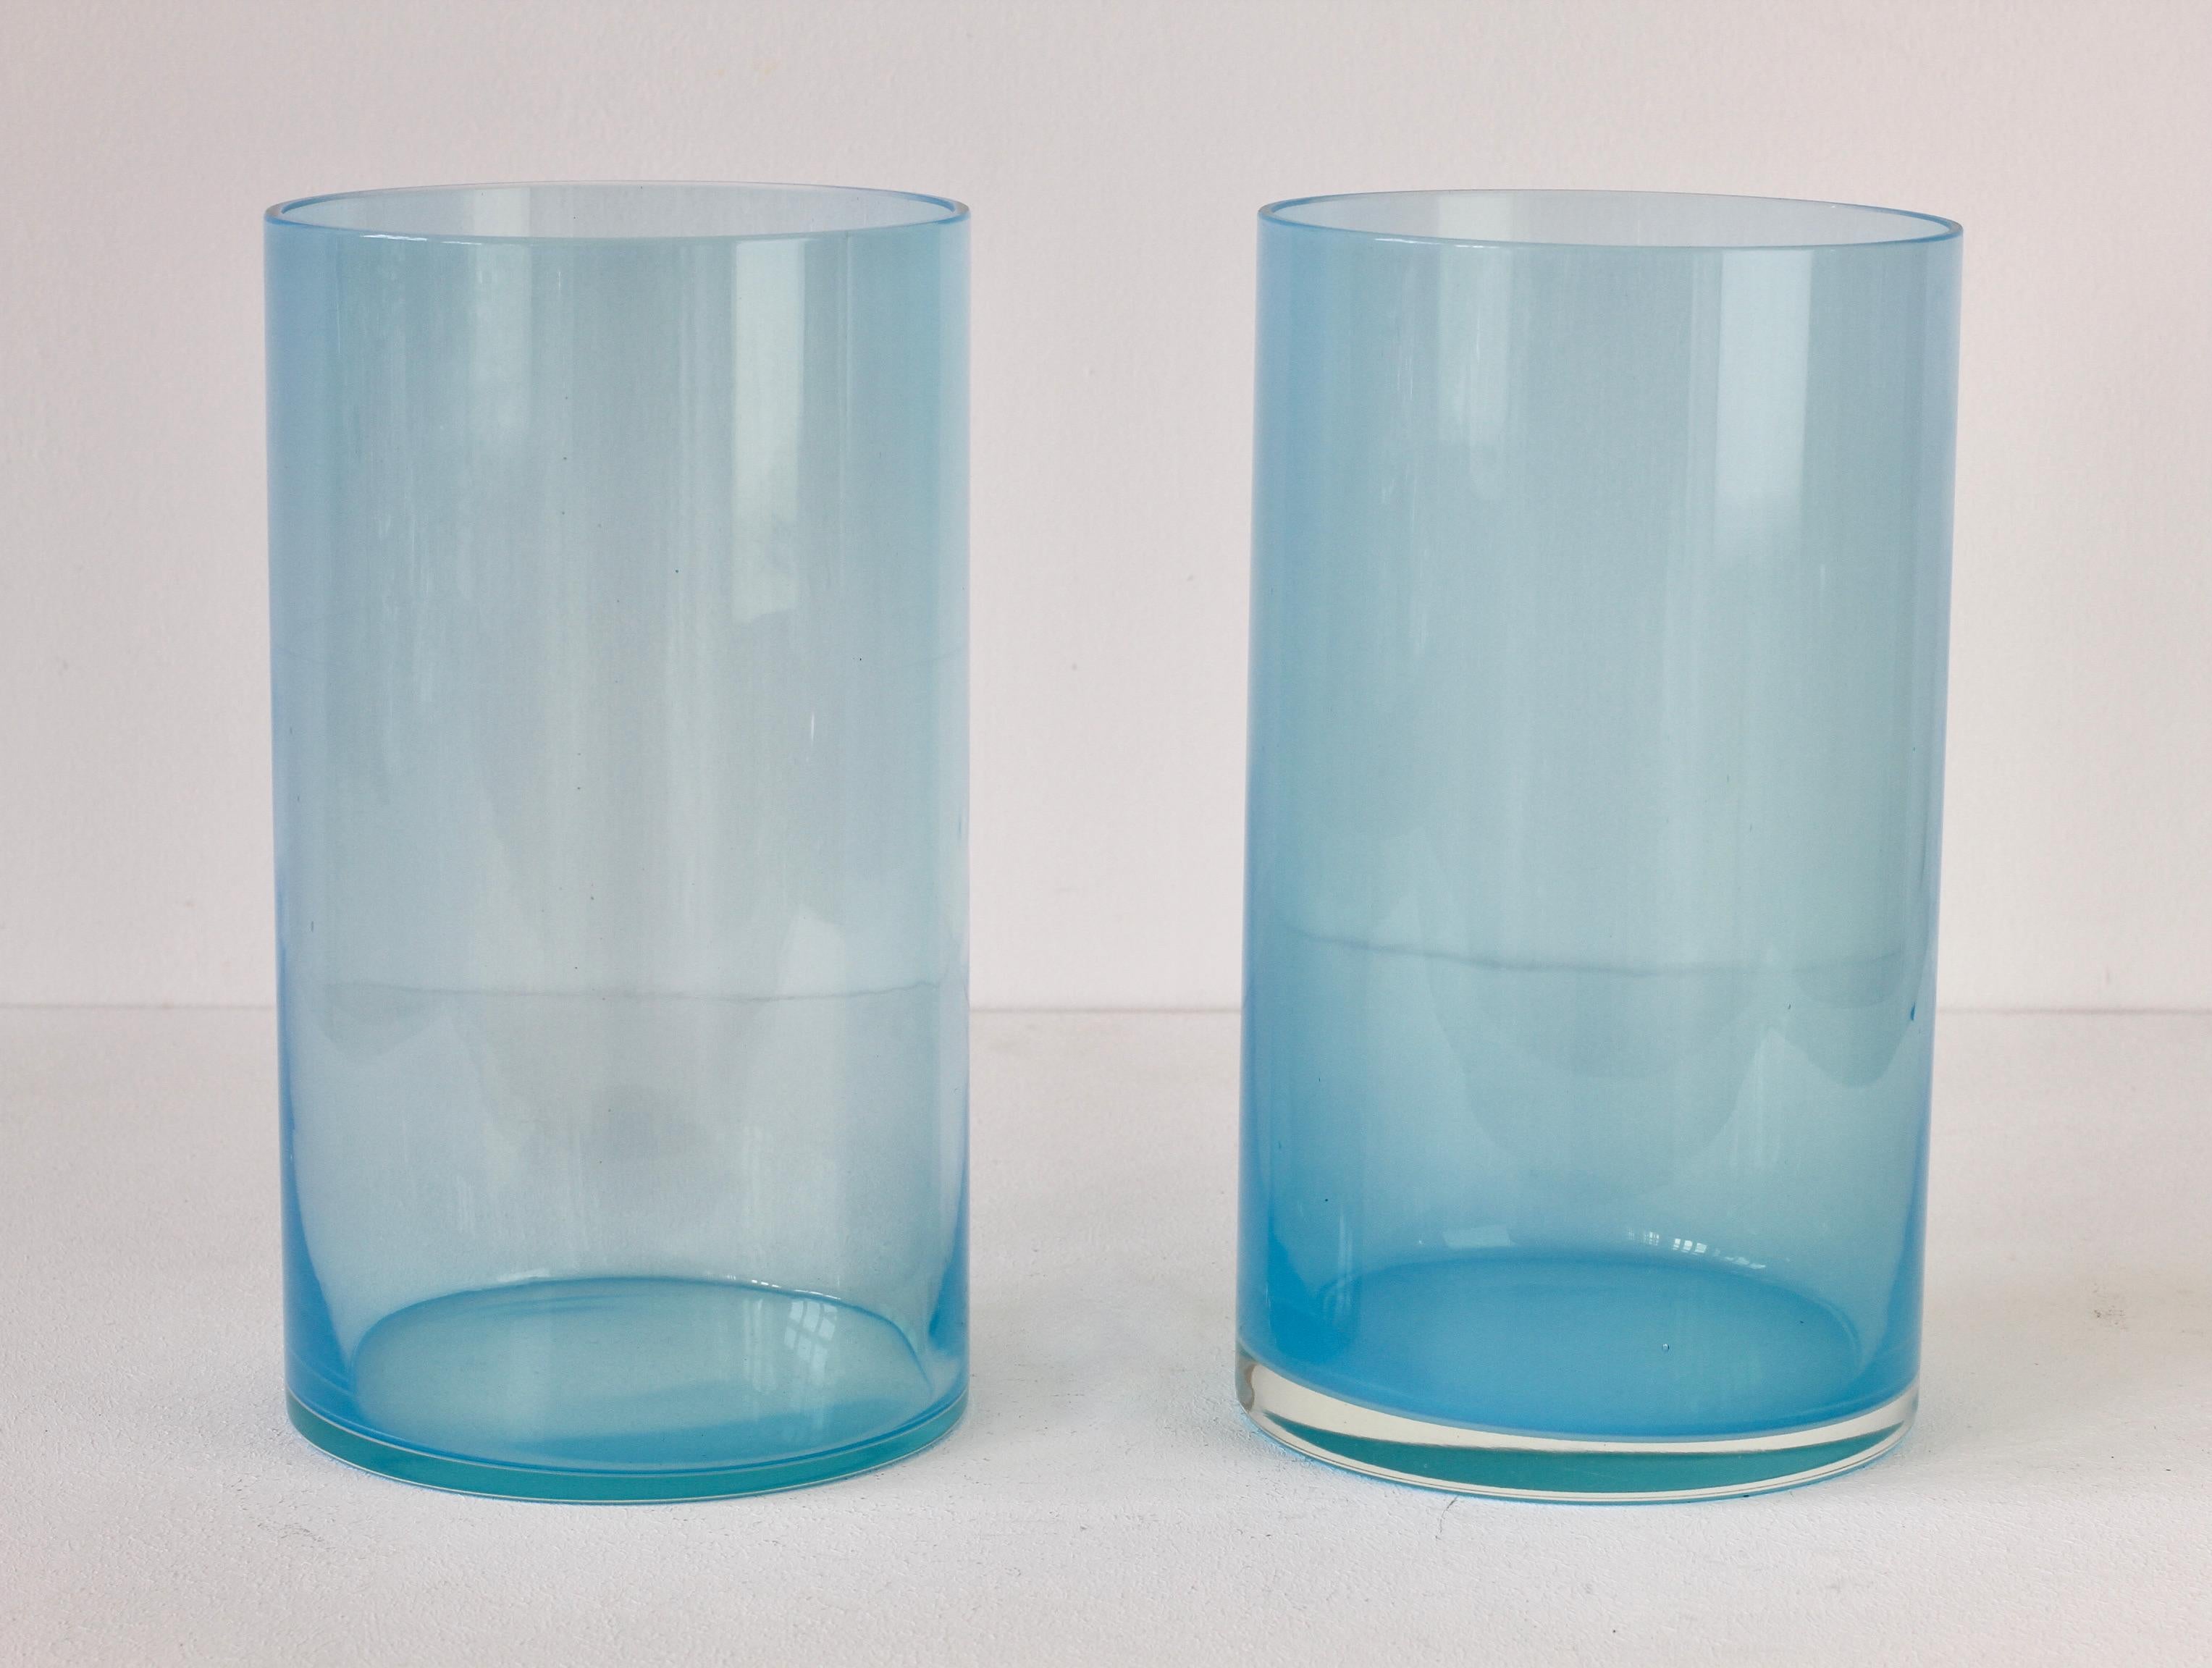 Mid-Century Modern Signed Pair of Antonio da Ros for Cenedese Vibrantly Colored Murano Glass Vases